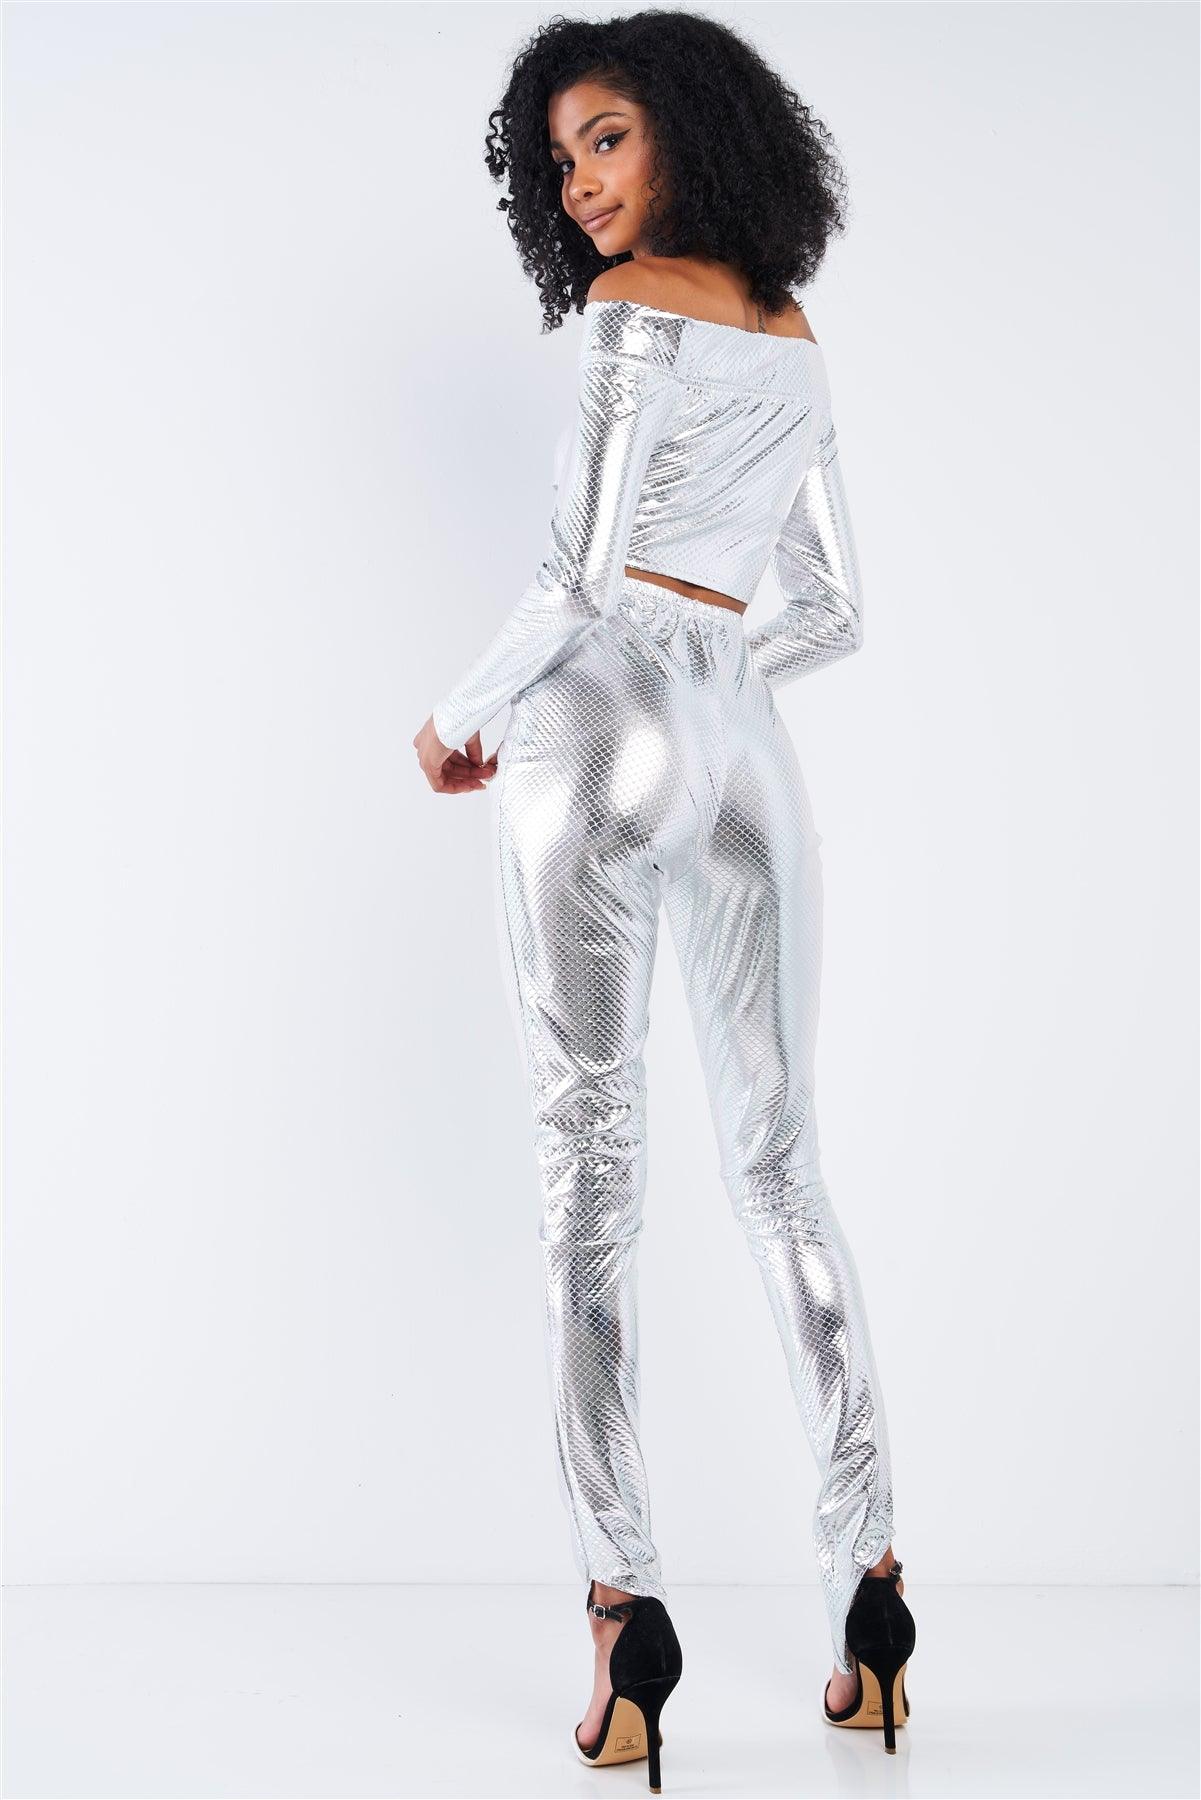 Metallic Silver Small Scales Print Long Sleeve Off-The-Shoulder Cropped Top And High Waist Slim Fit Legging Set /3-2-1